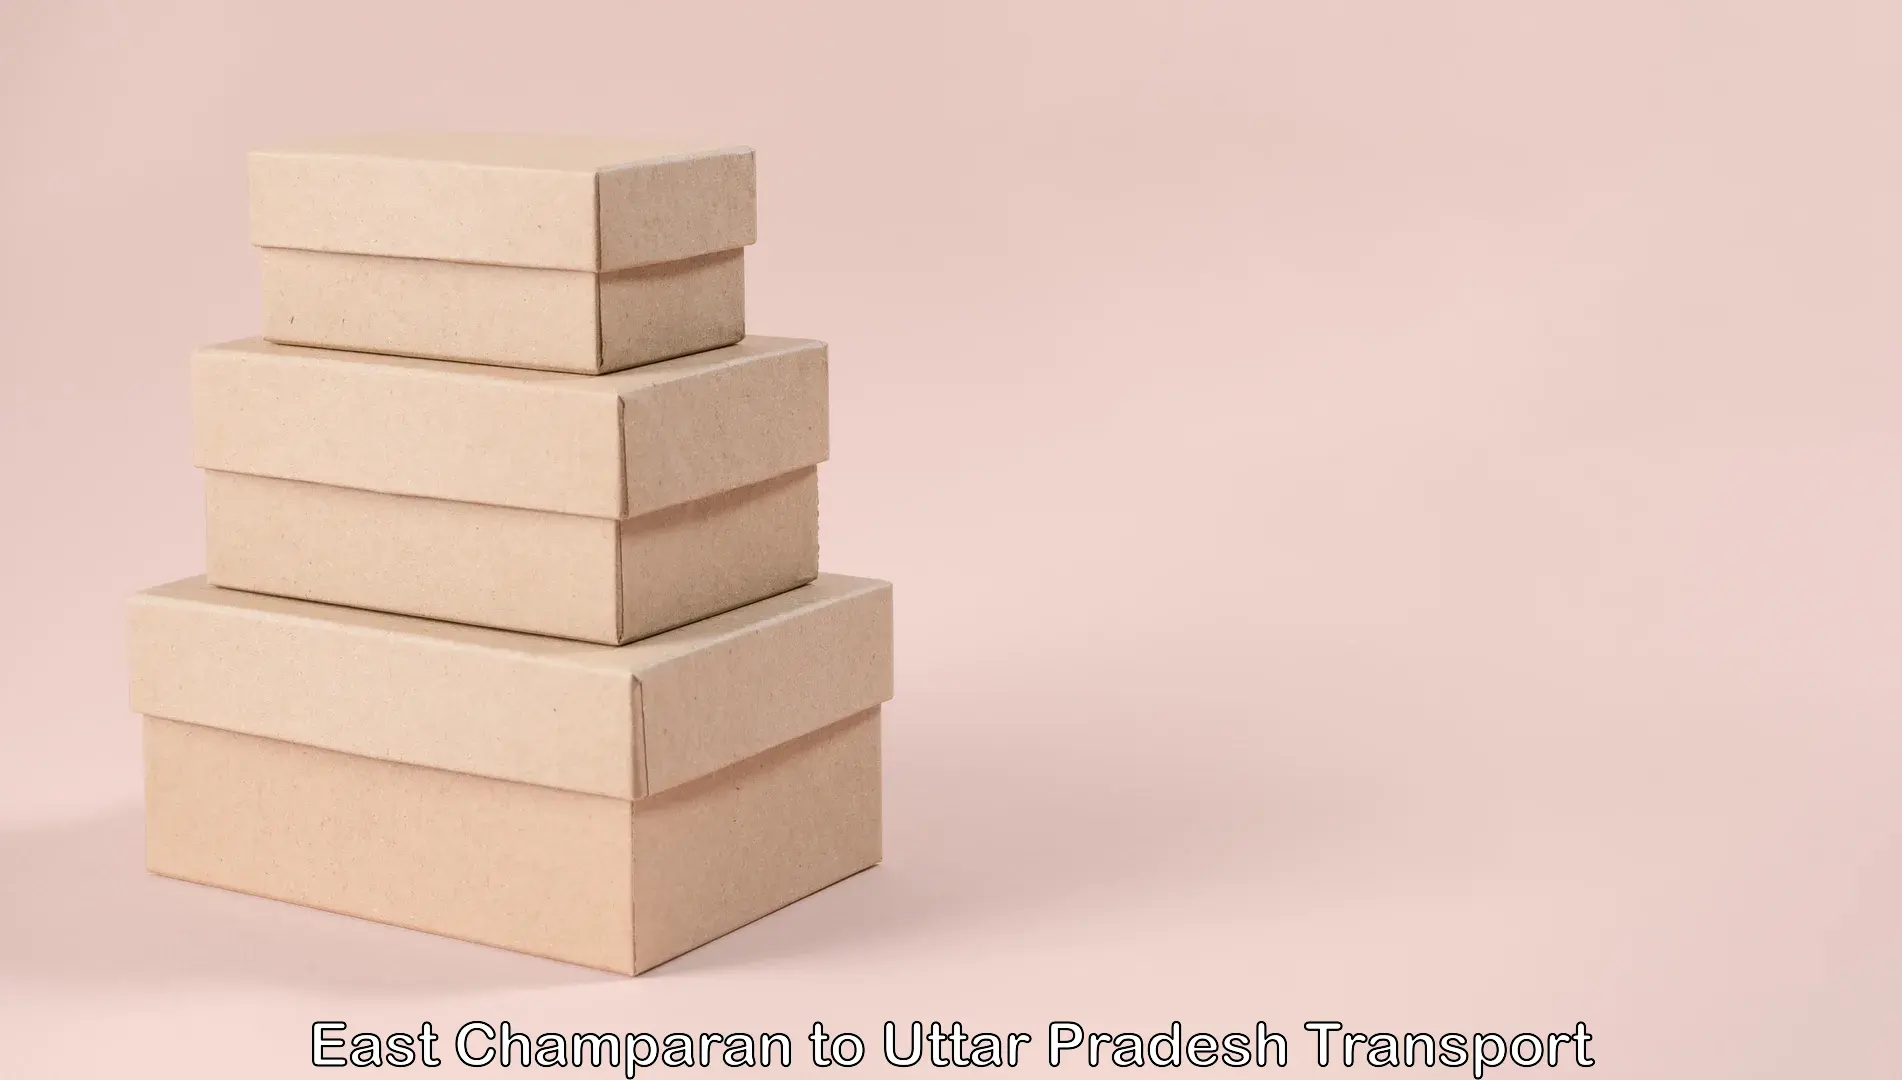 Air freight transport services in East Champaran to Bansi